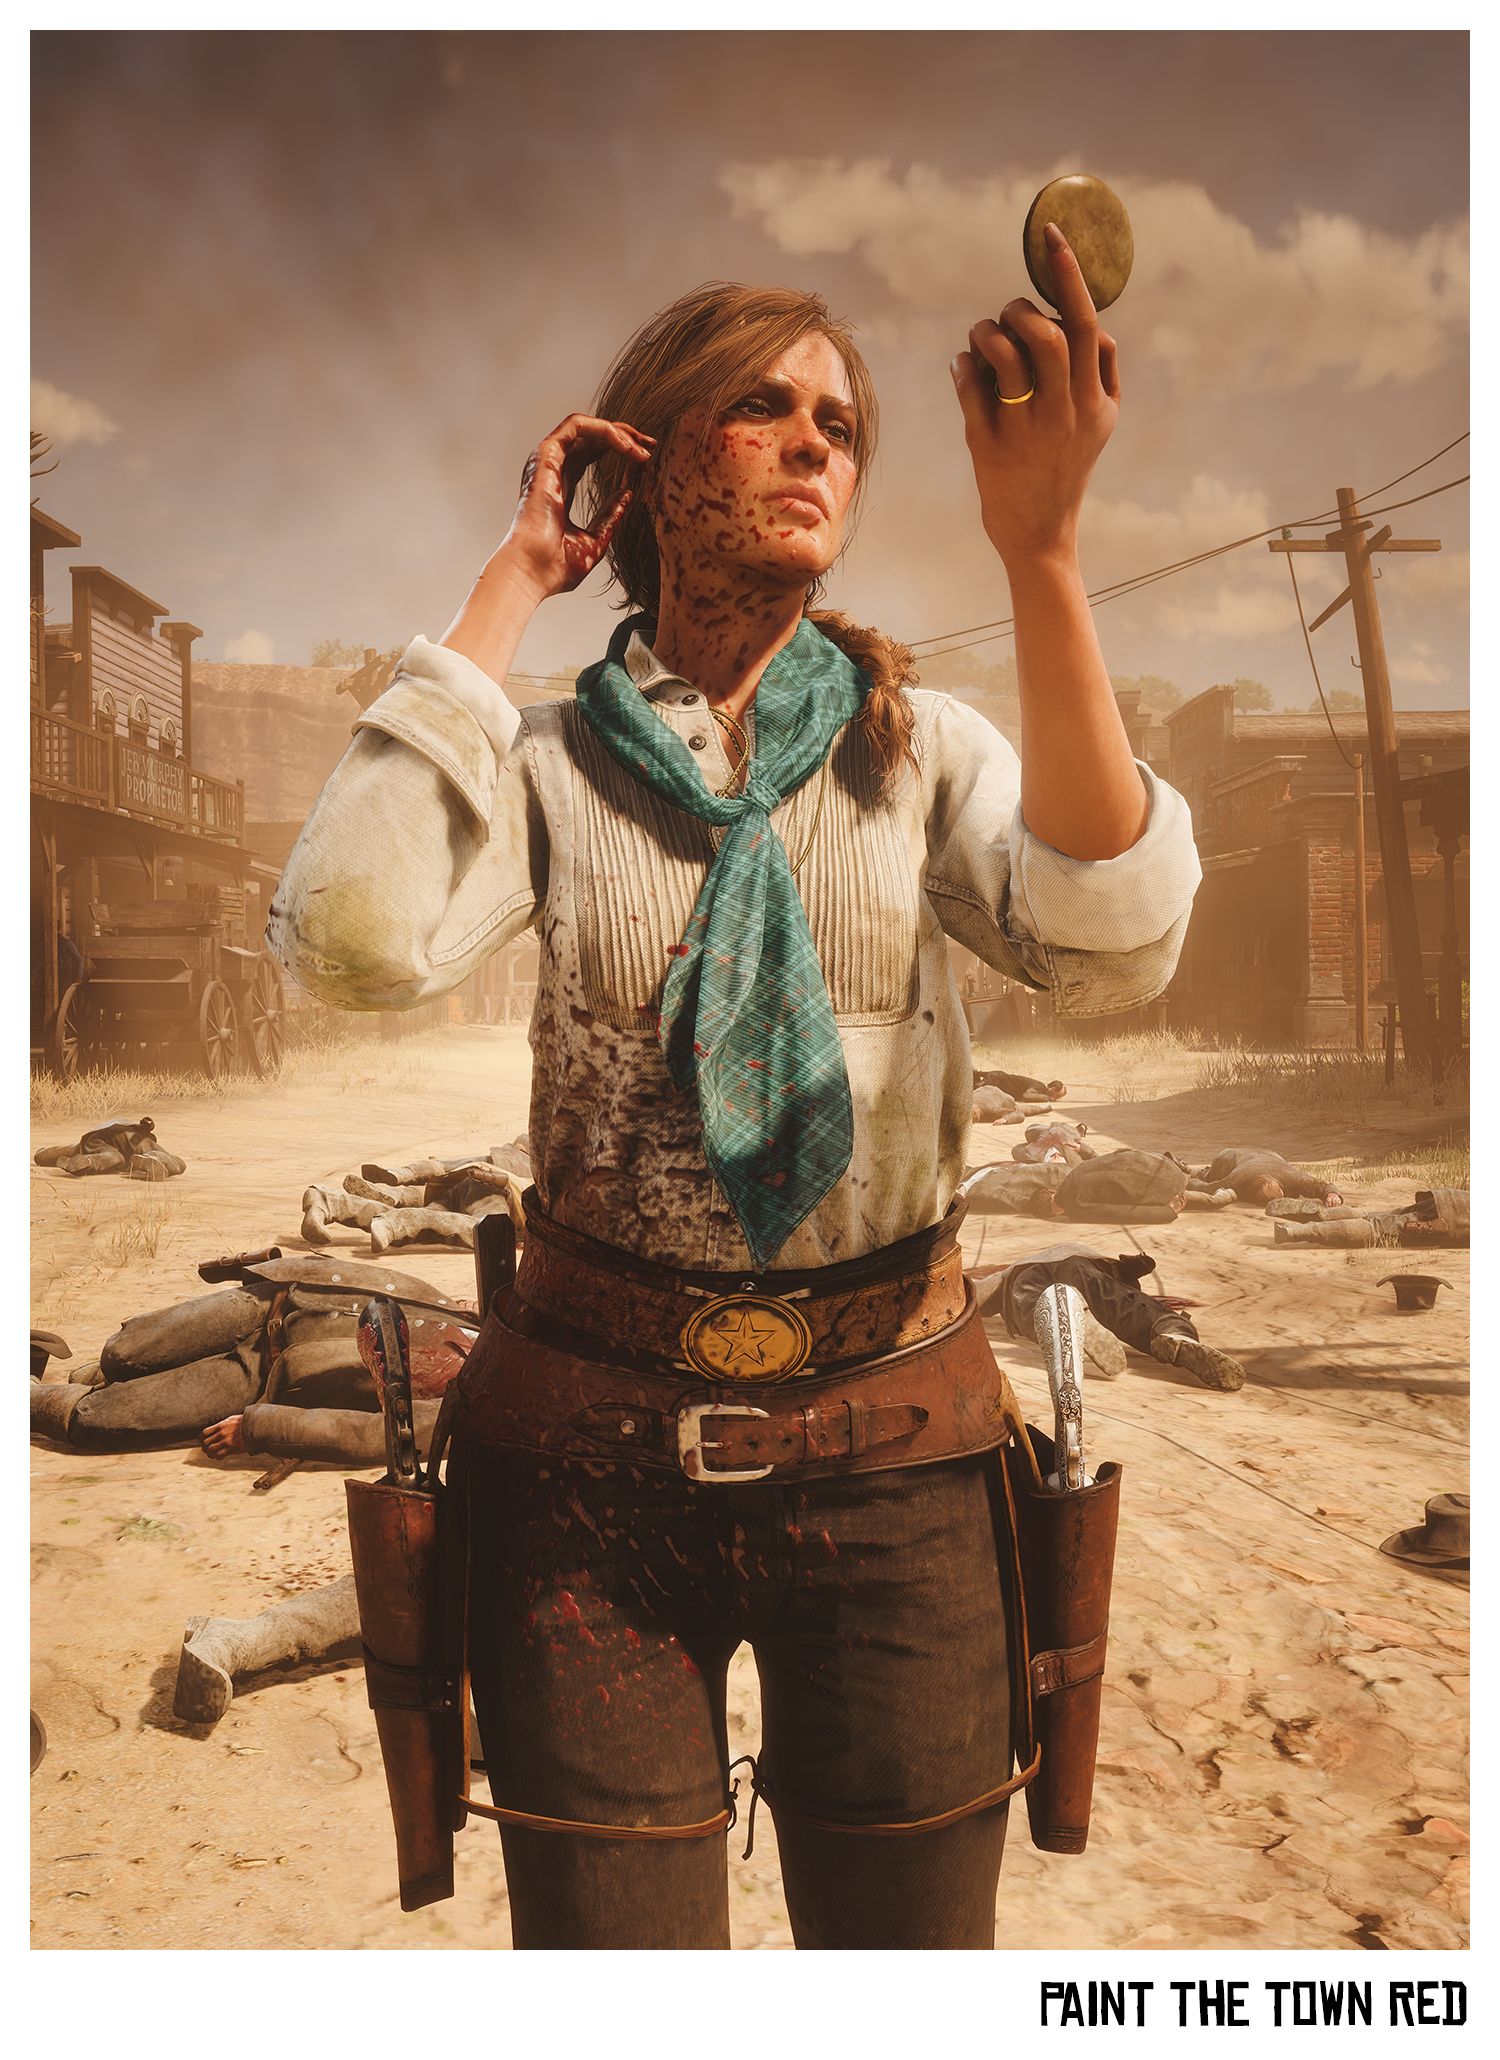 I used photomode & mods to imagine 12 missions for the Sadie Adler DLC